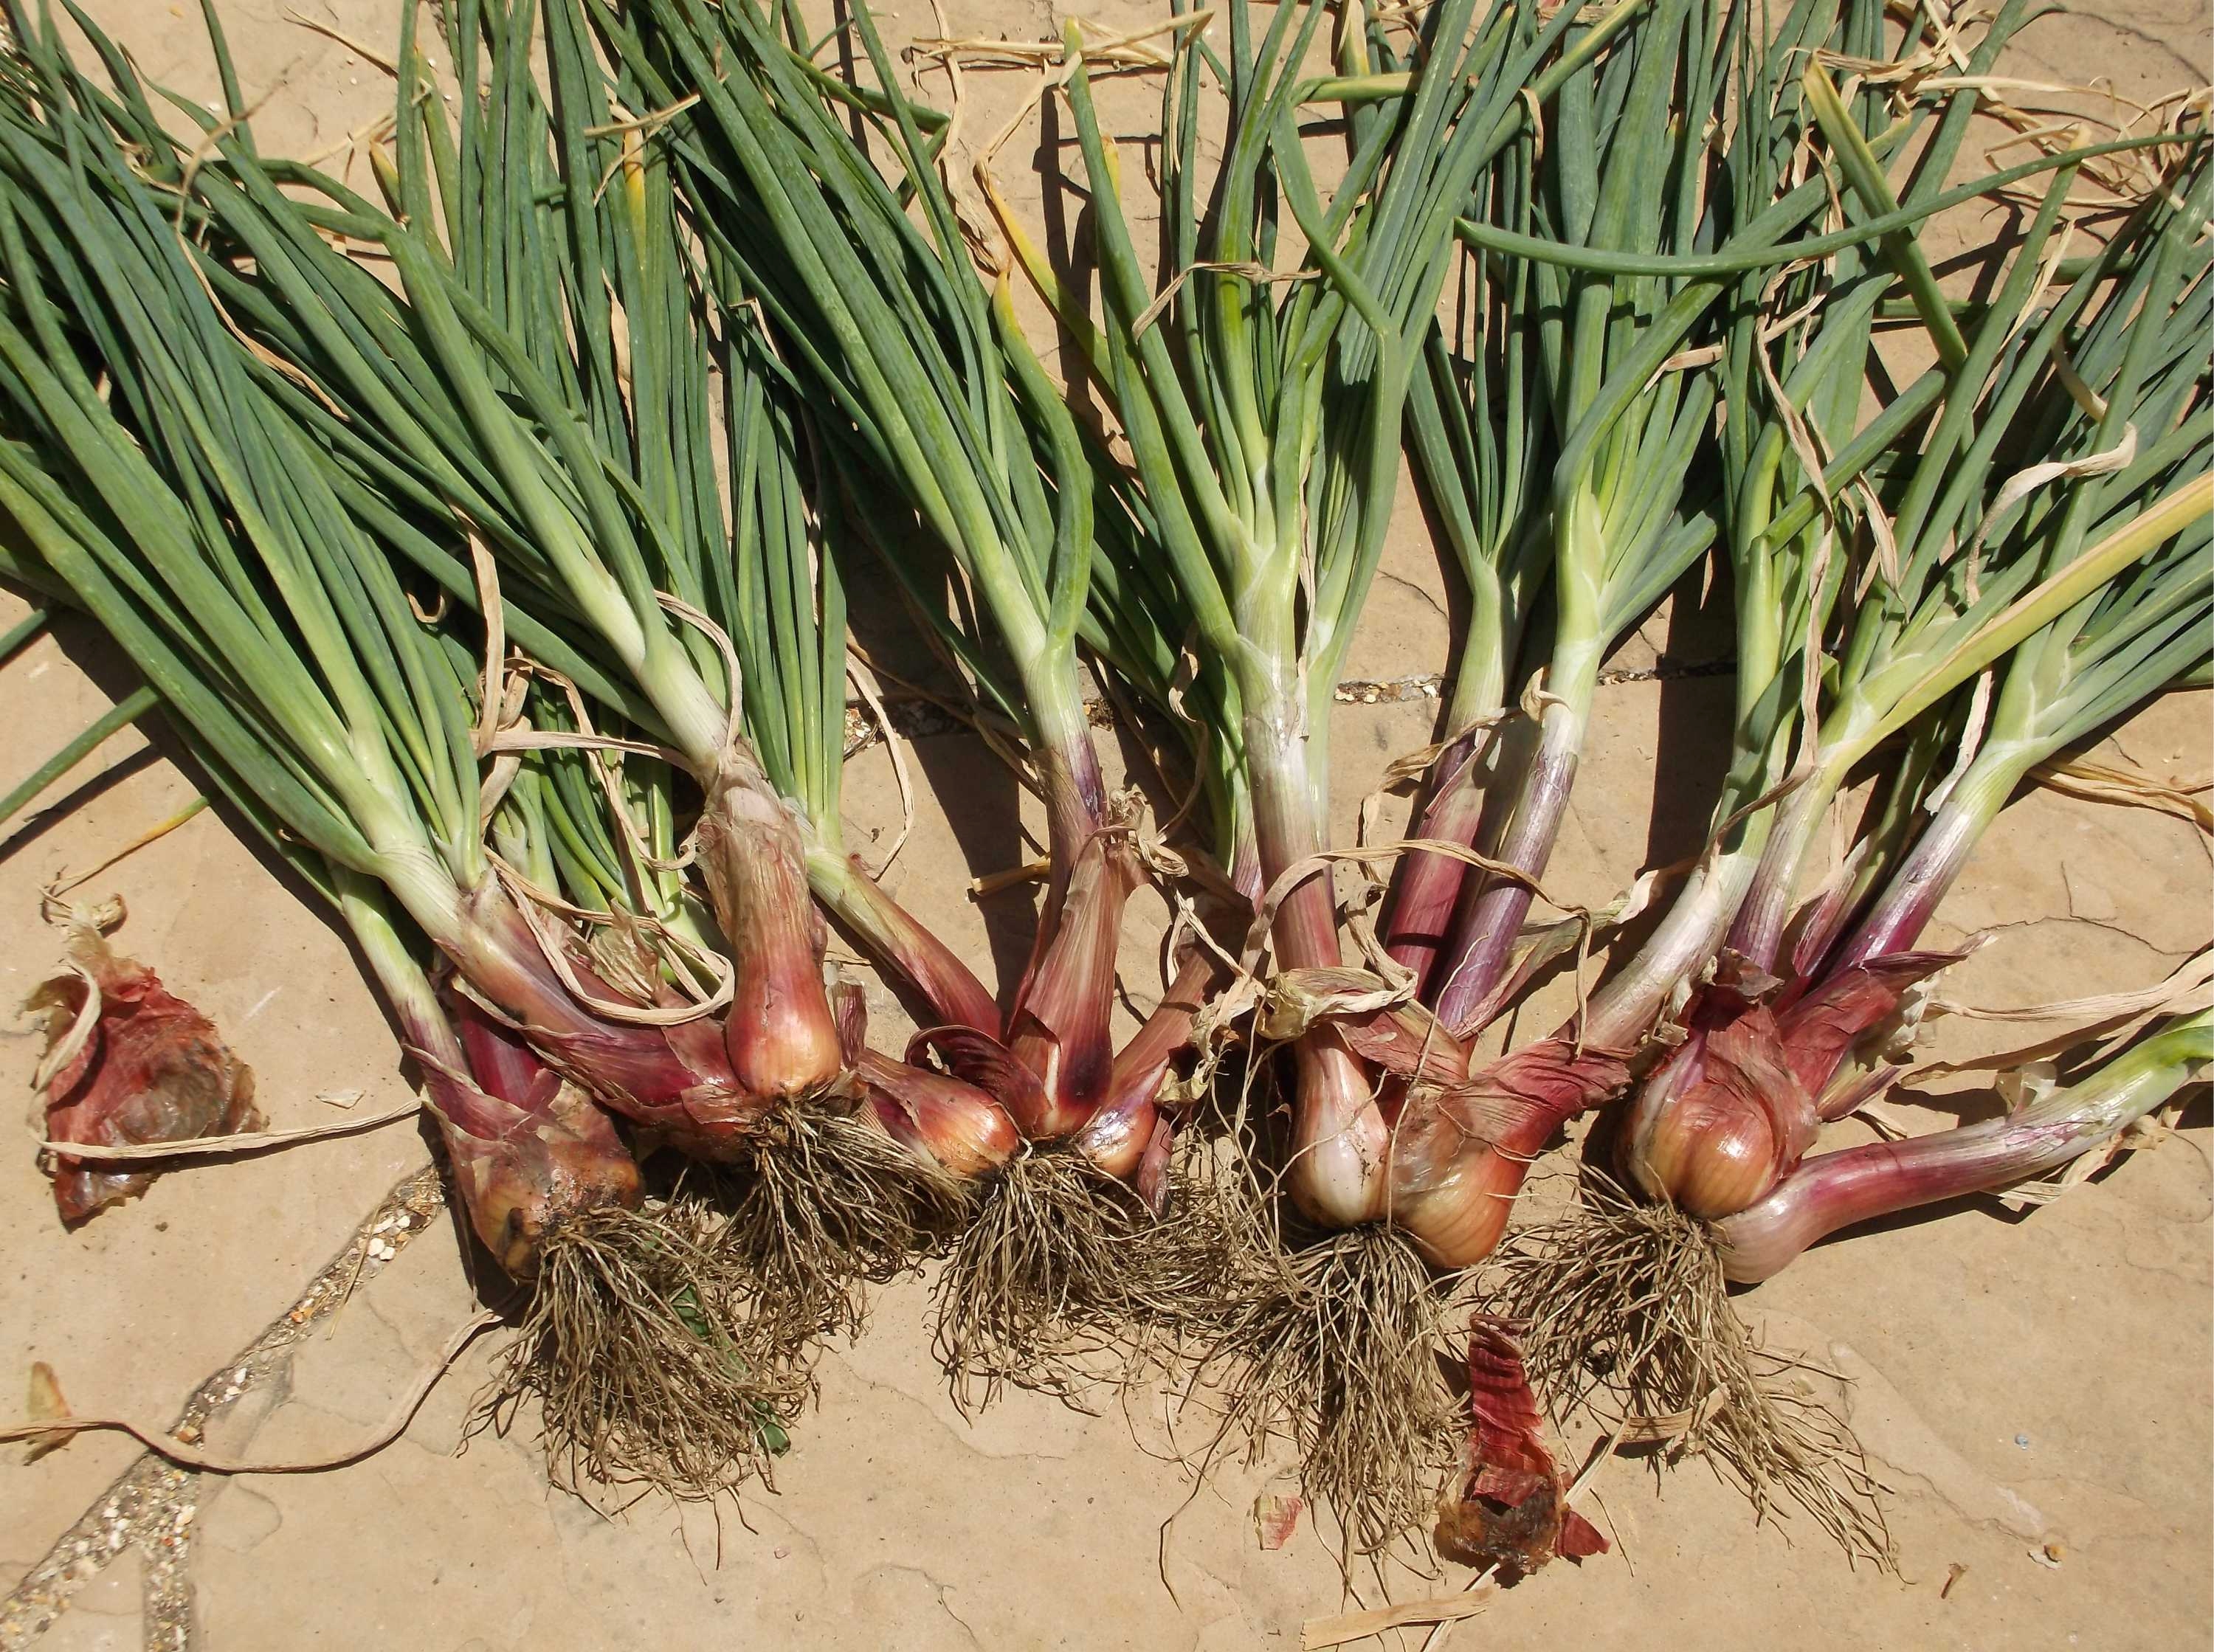 How to grow Shallots